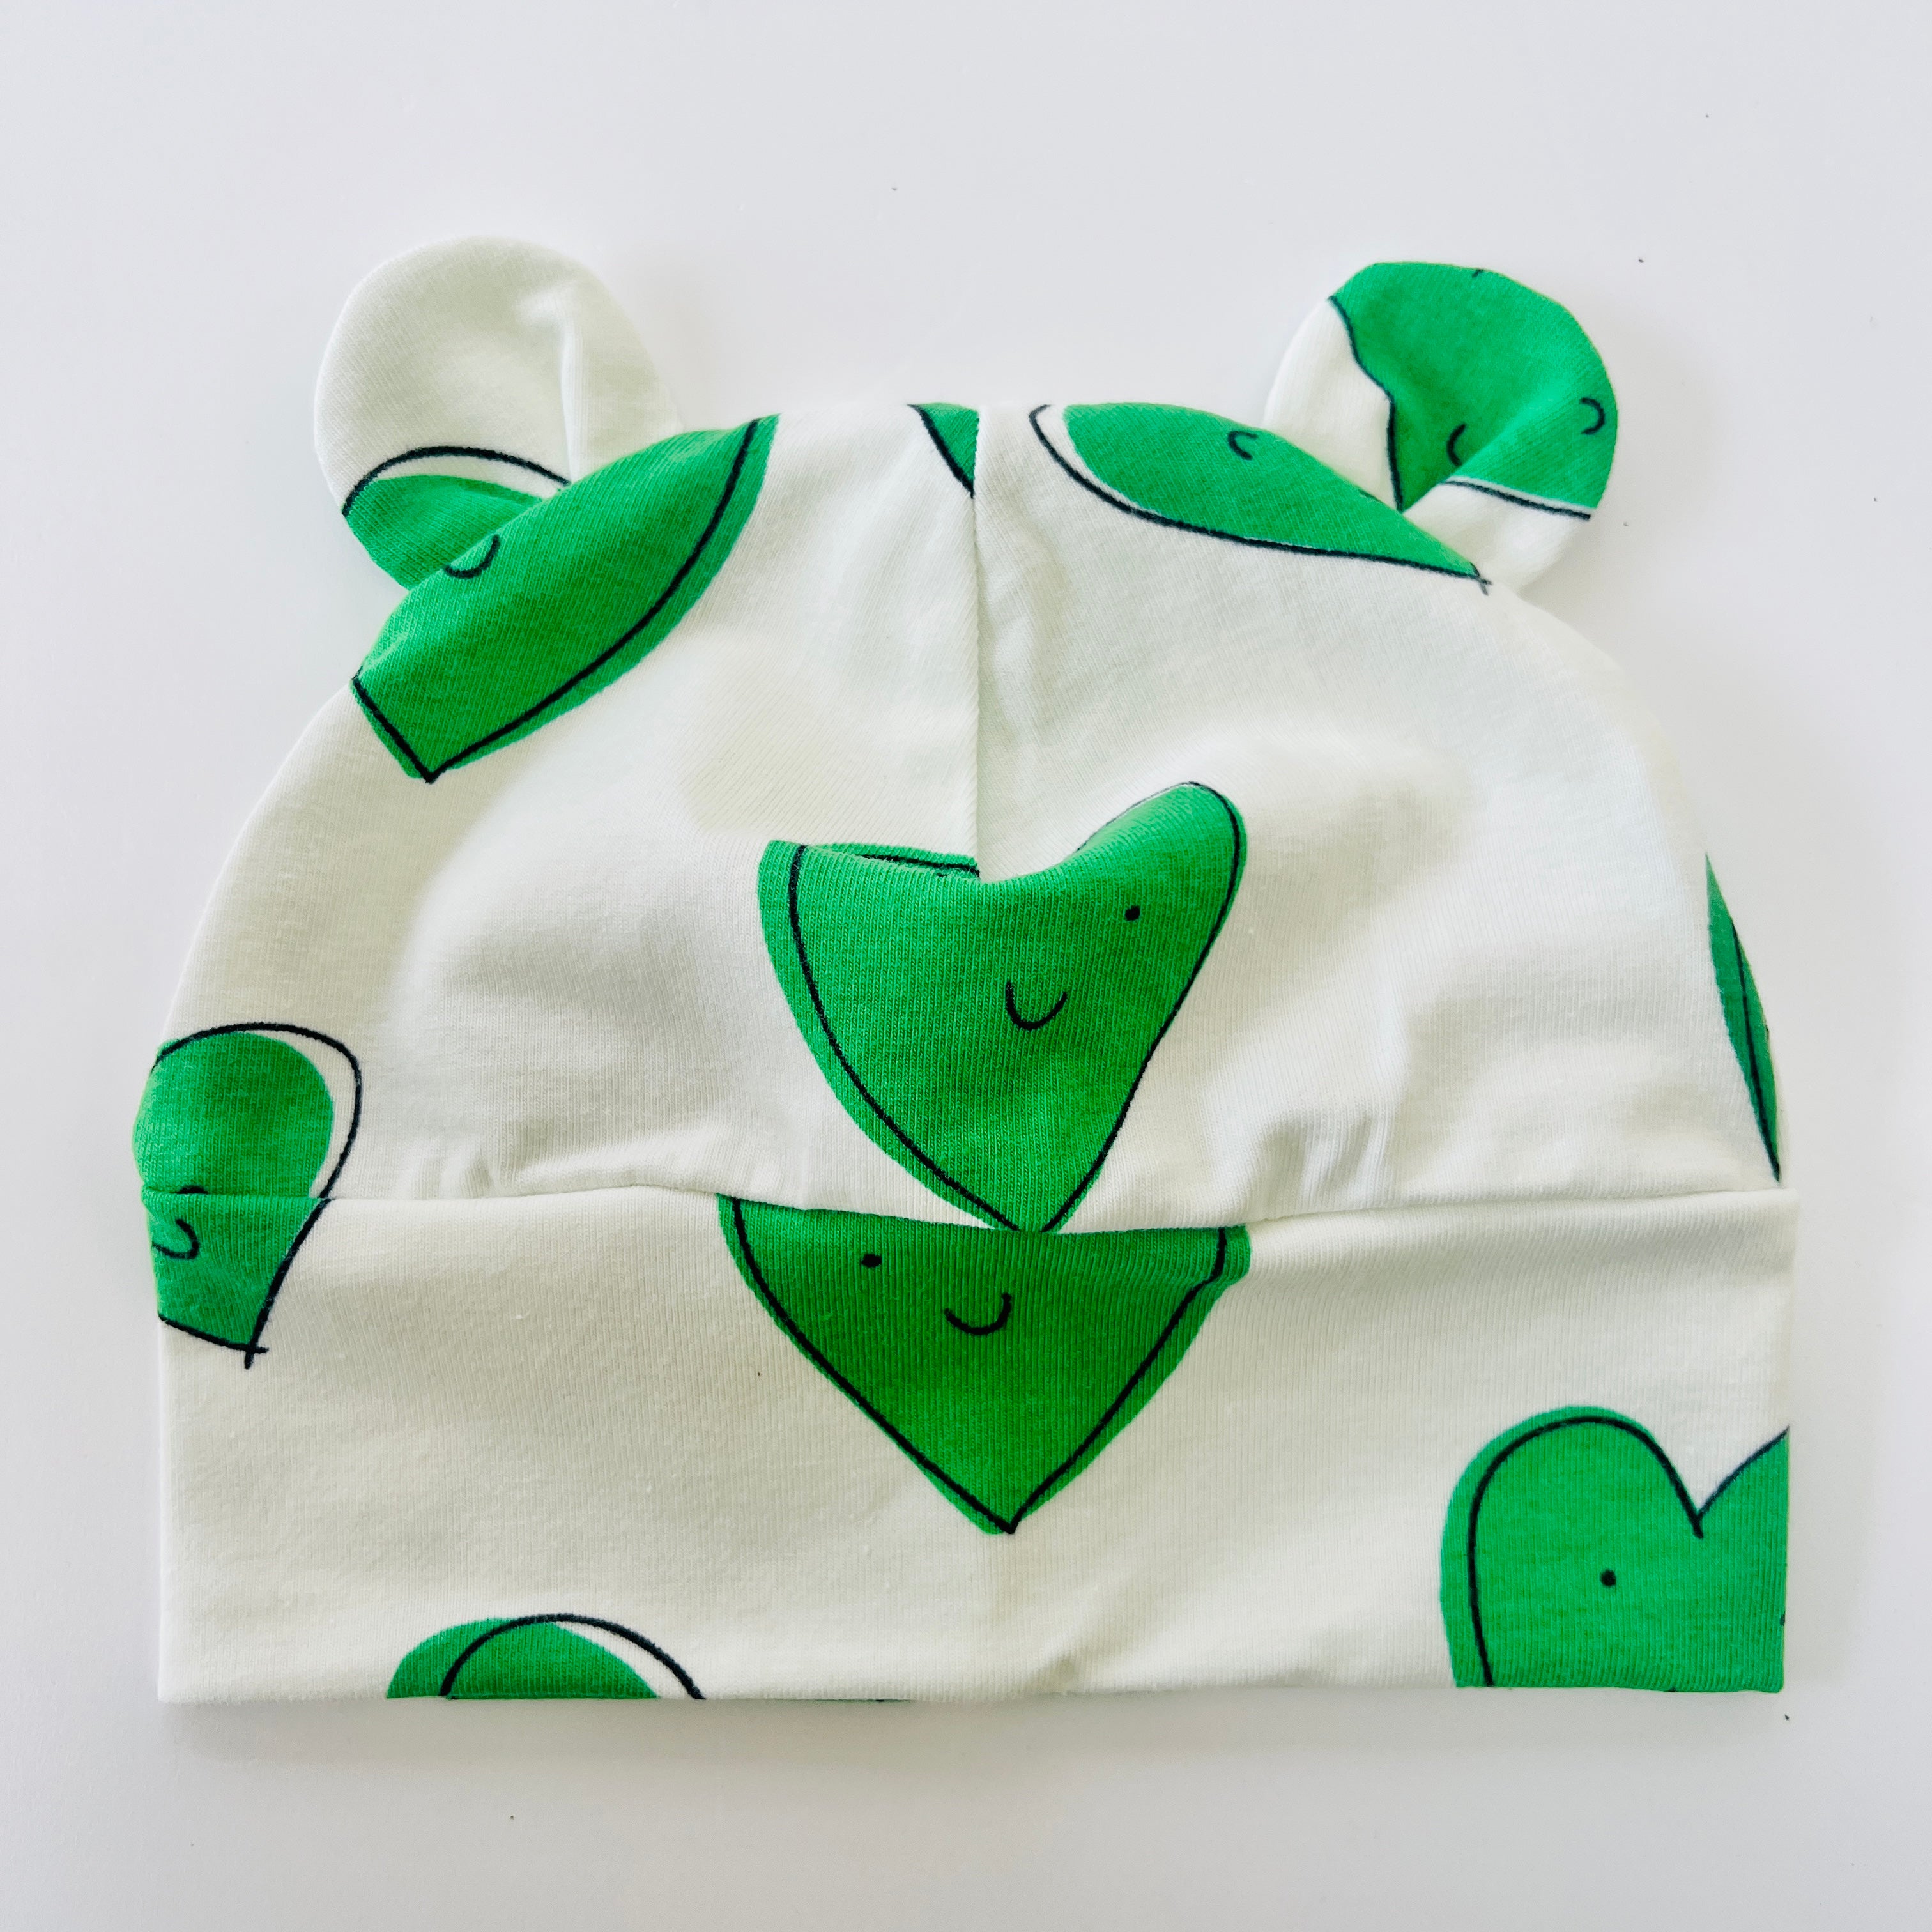 Eddie & Bee organic cotton Baby hat with ears  in Green " Happy hearts" print.